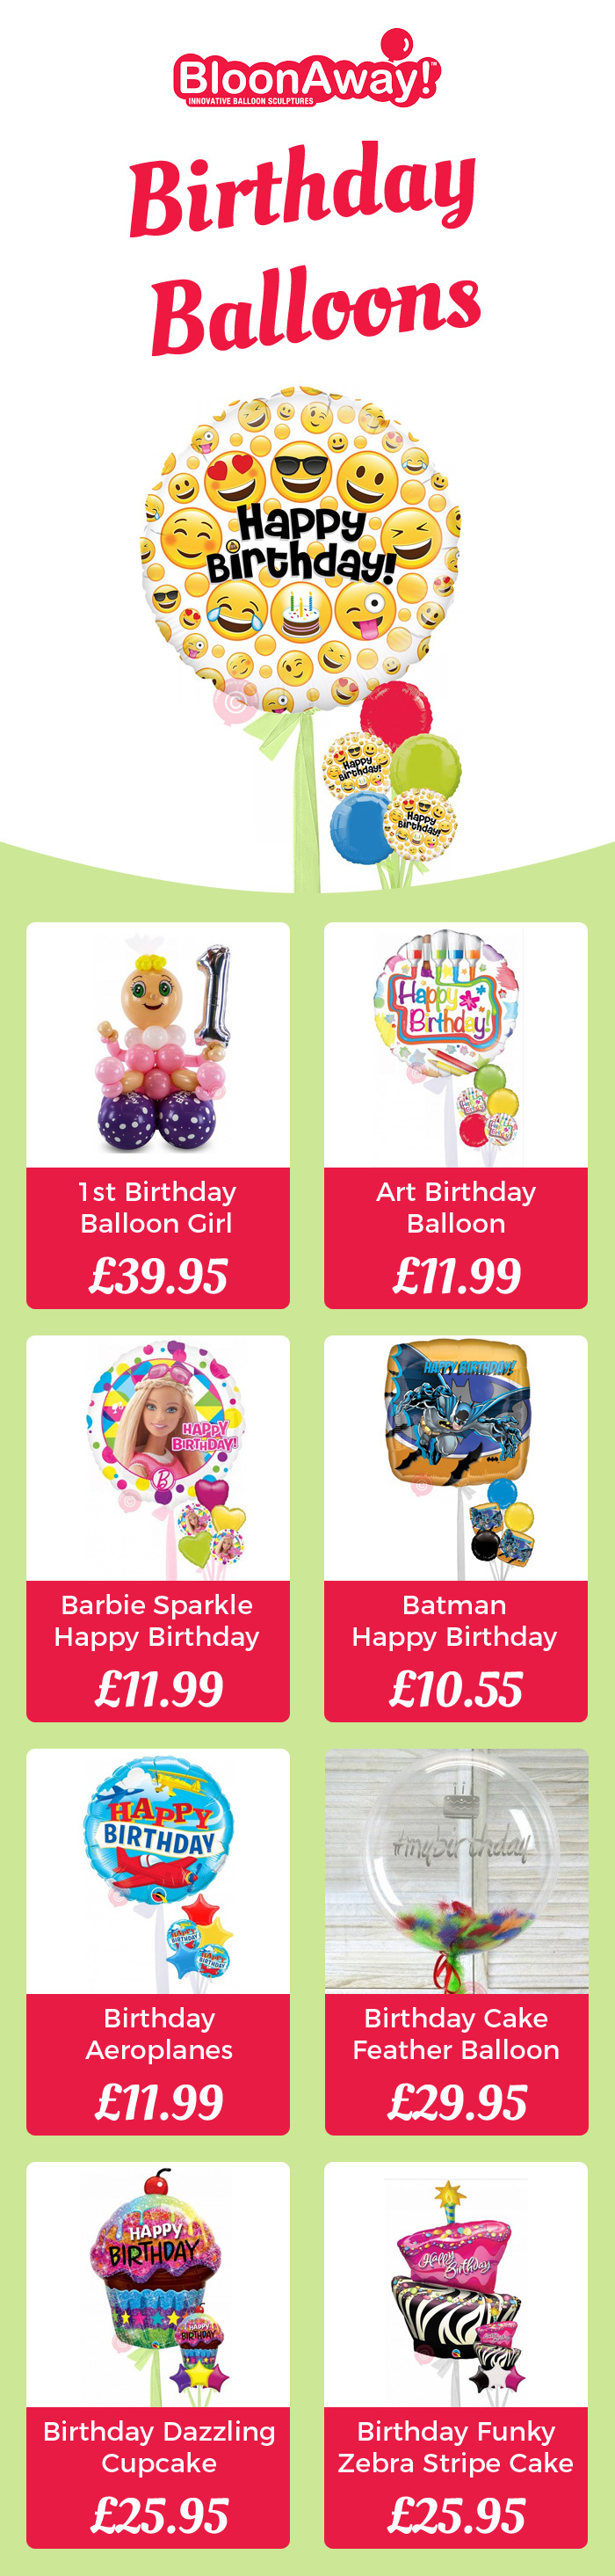 Get Next Day Delivery for Helium Inflated Birthday Balloons in the UK